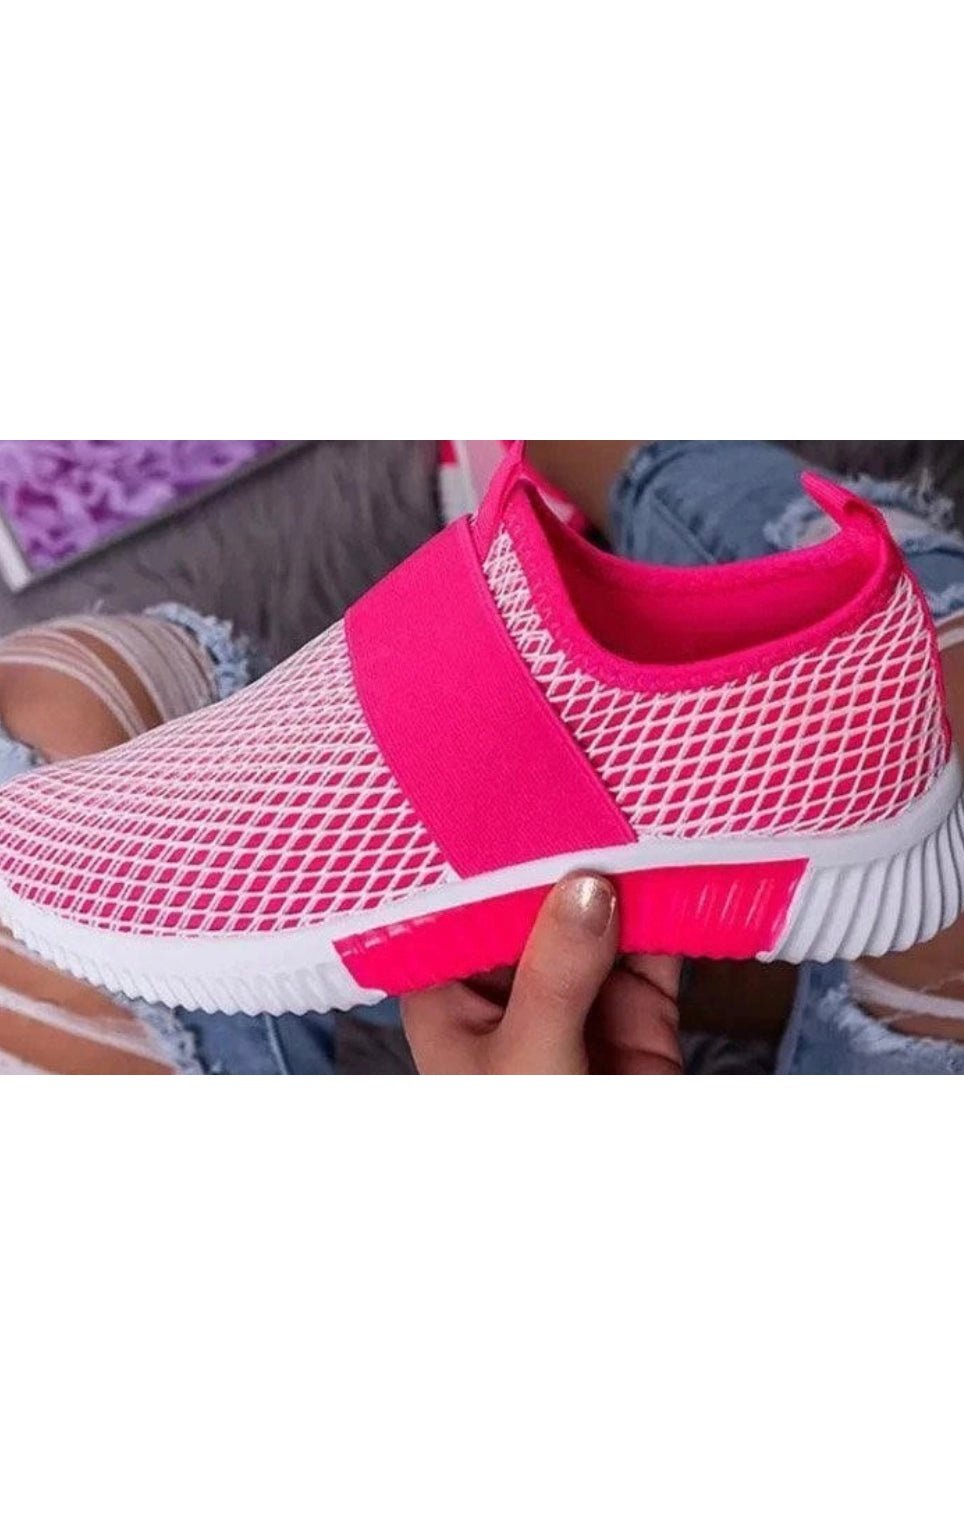 Women’s Mesh Breathable Slip one Sneakers (Many Colors)